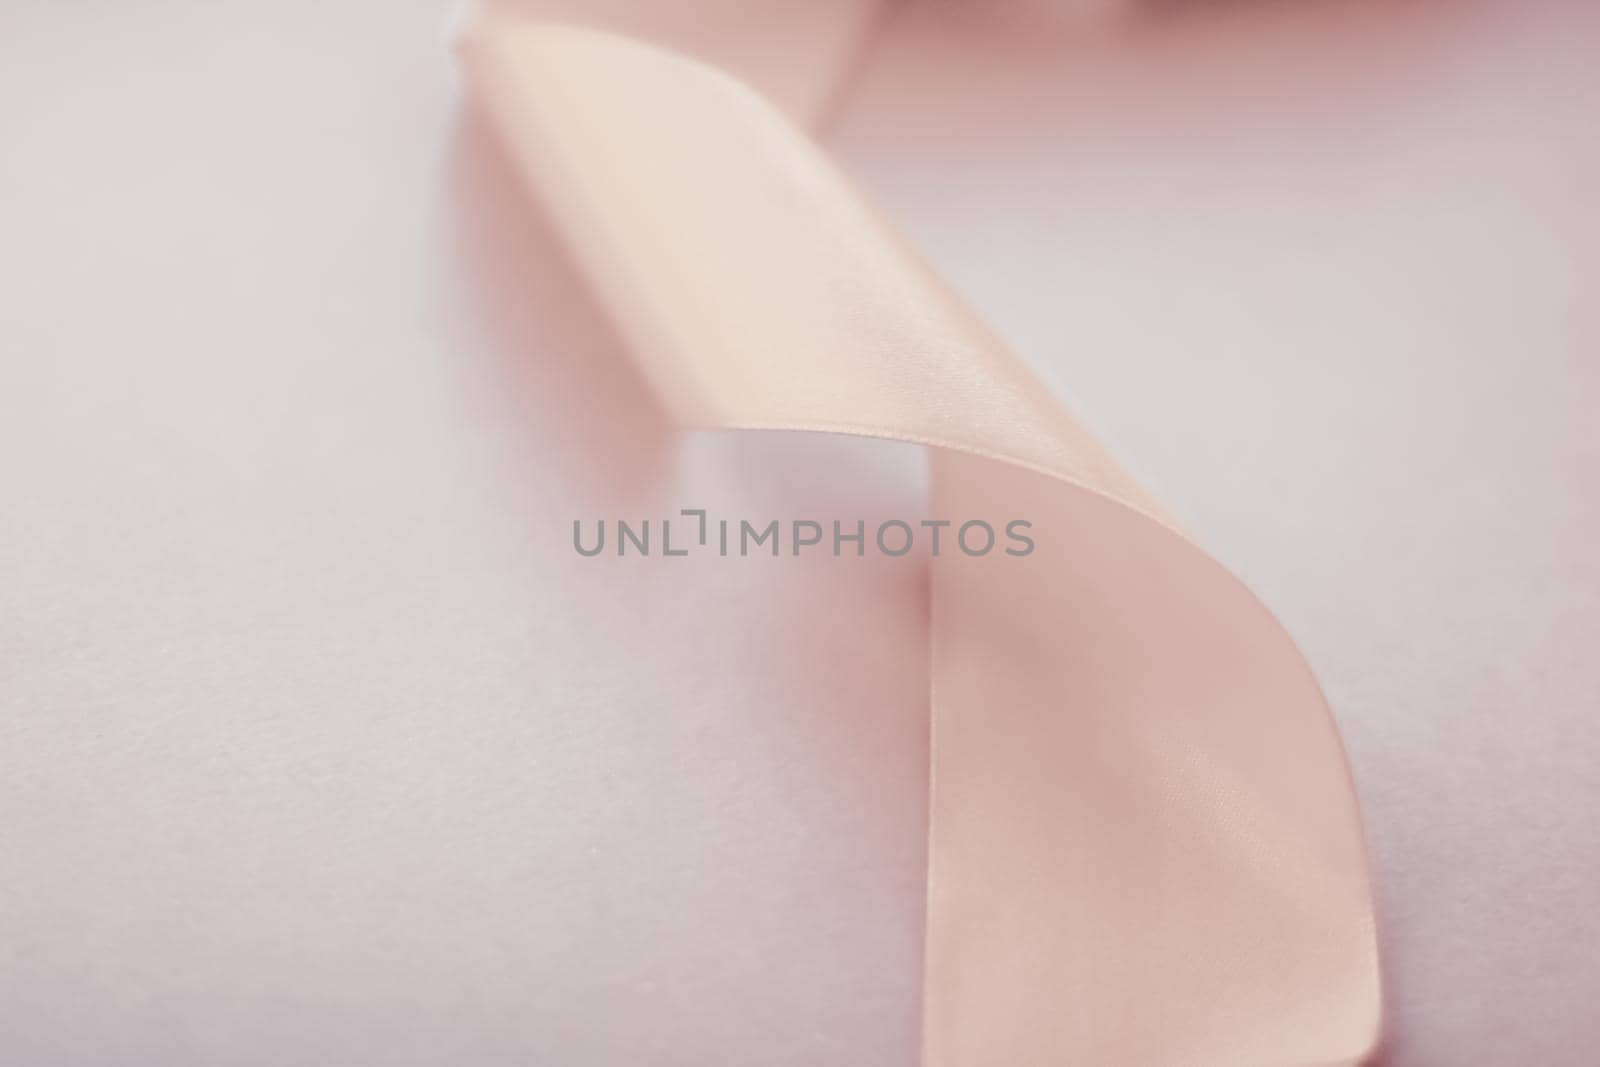 Abstract curly silk ribbon on pastel background, exclusive luxury brand design for holiday sale product promotion and glamour art invitation card backdrop by Anneleven